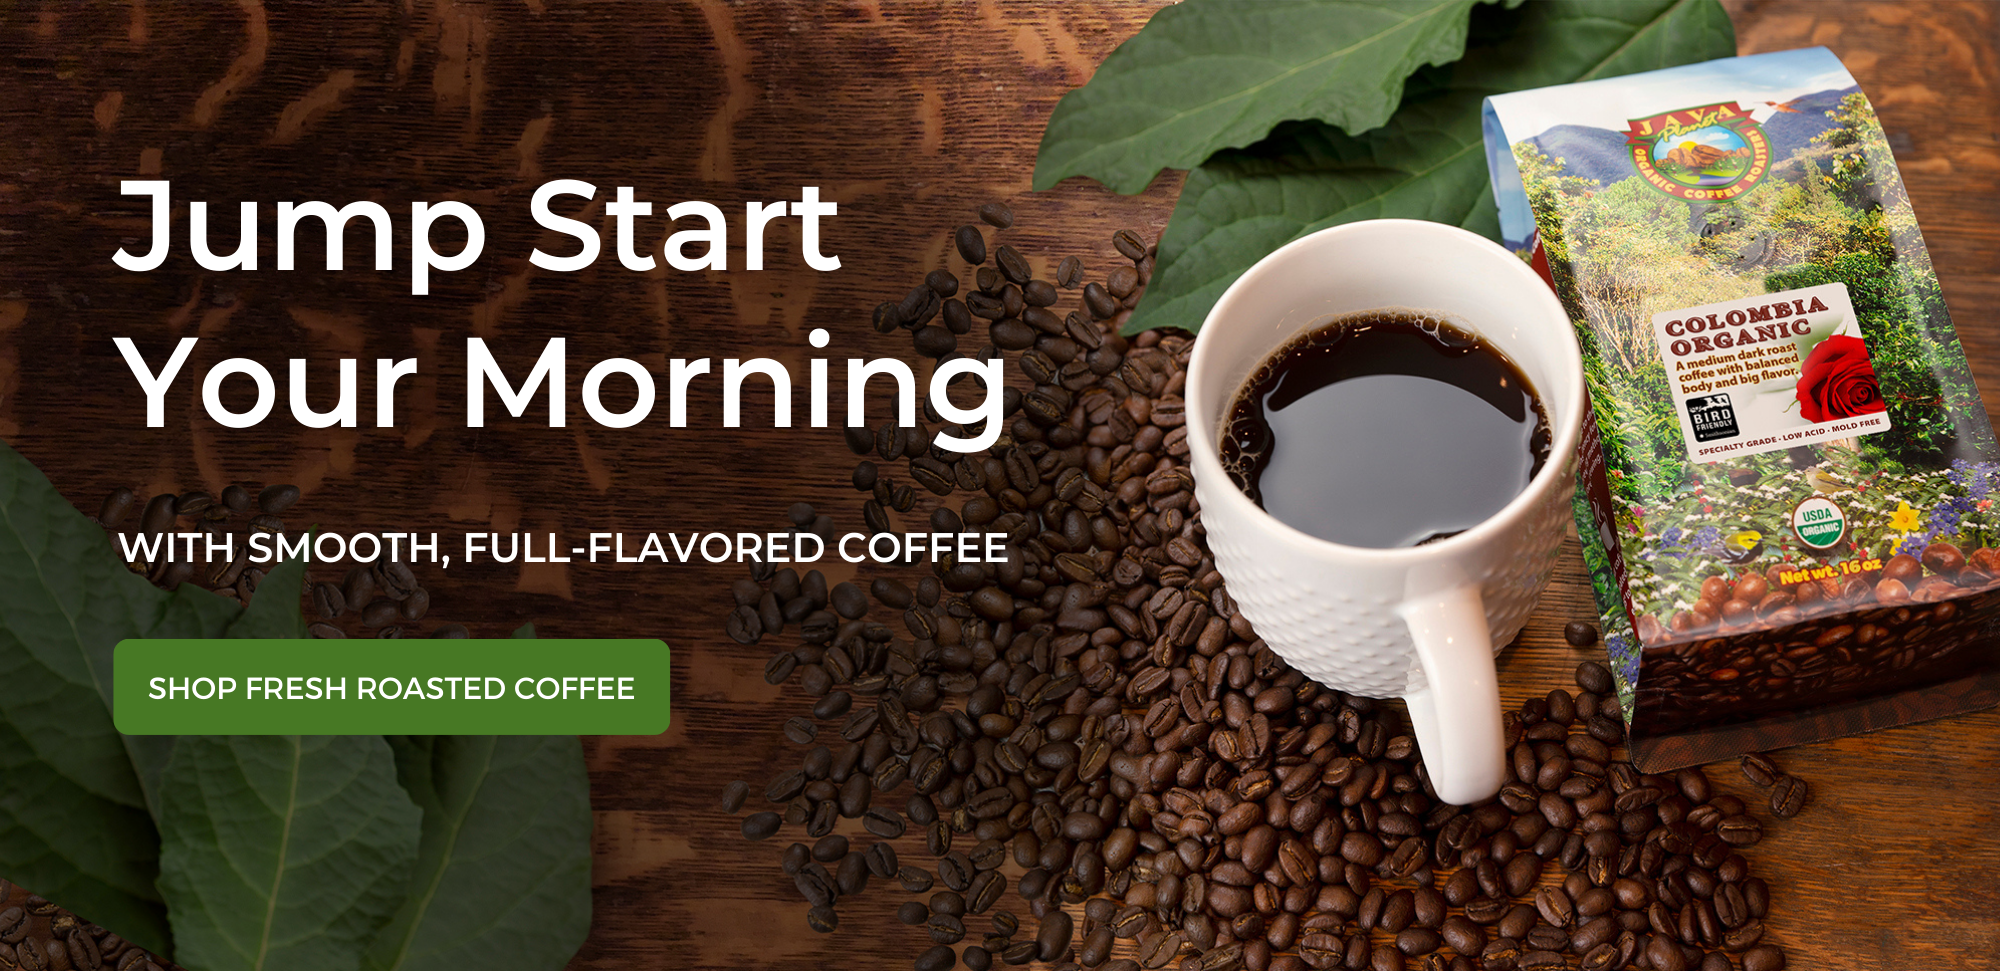 Jump Start Your Morning with smooth full flavored coffee